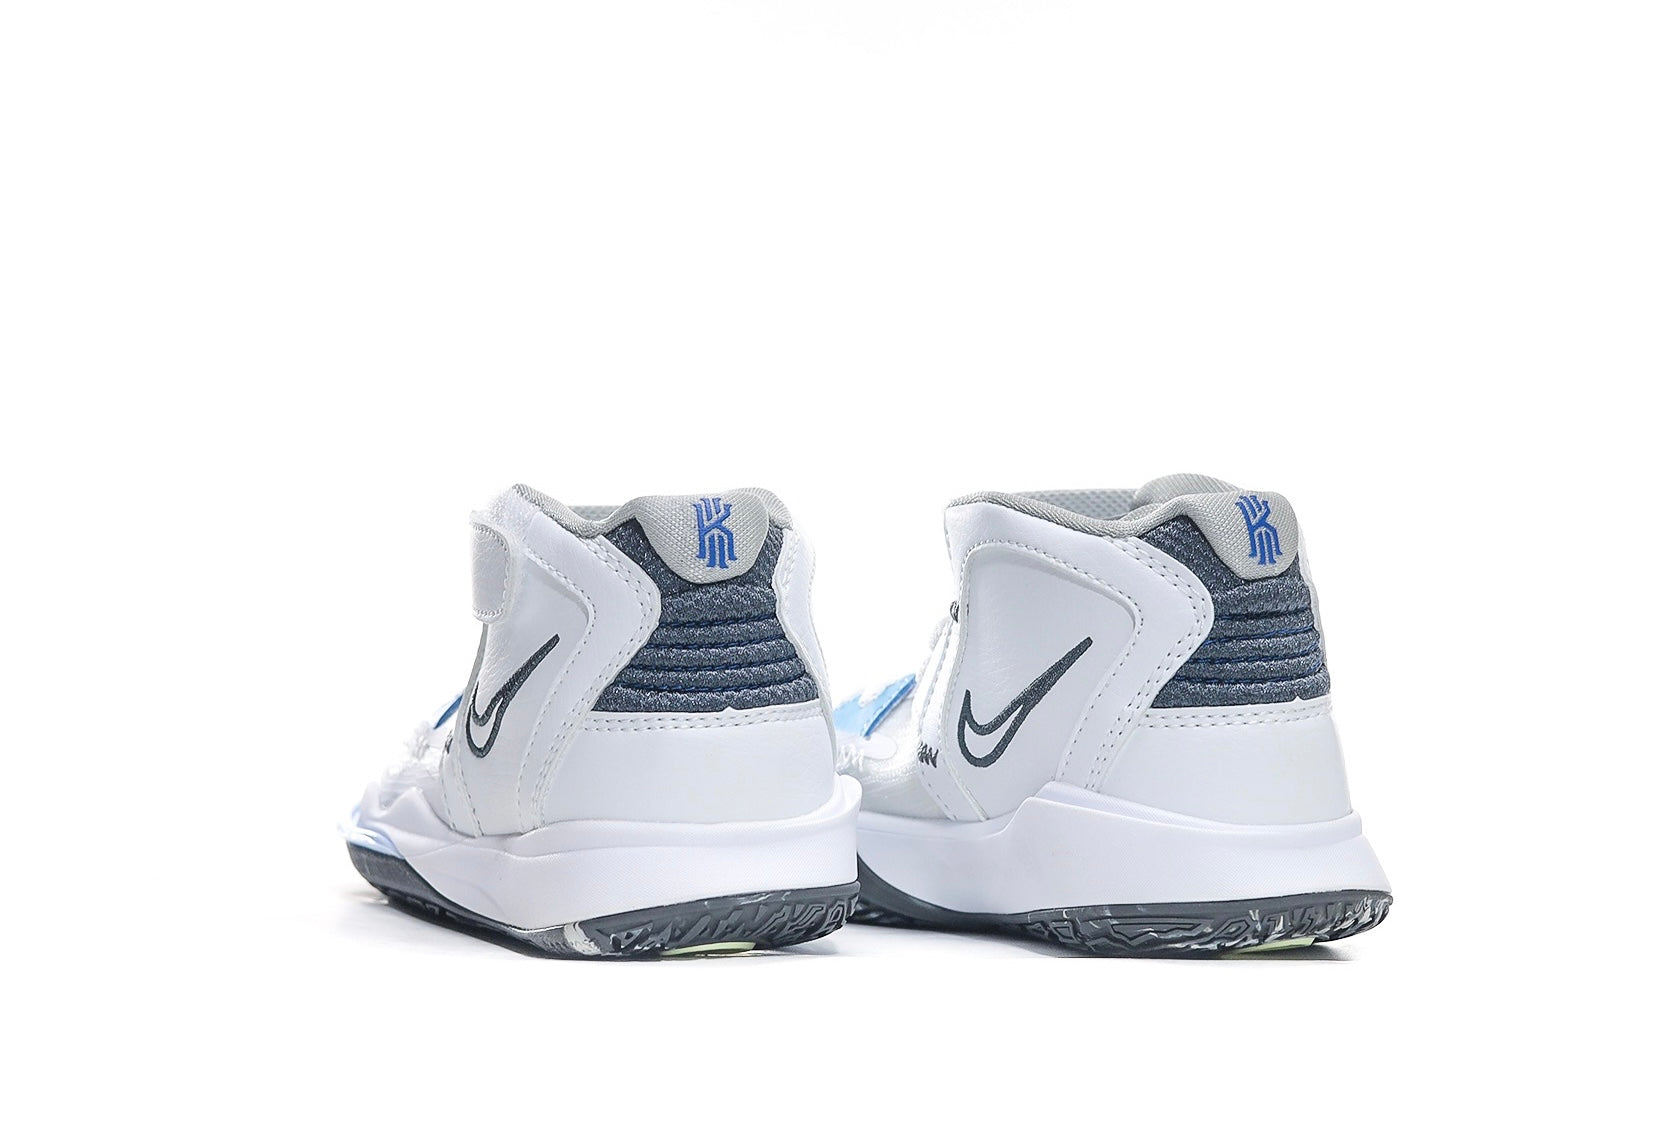 Nike kyrie infinity EP white/ blue shoes